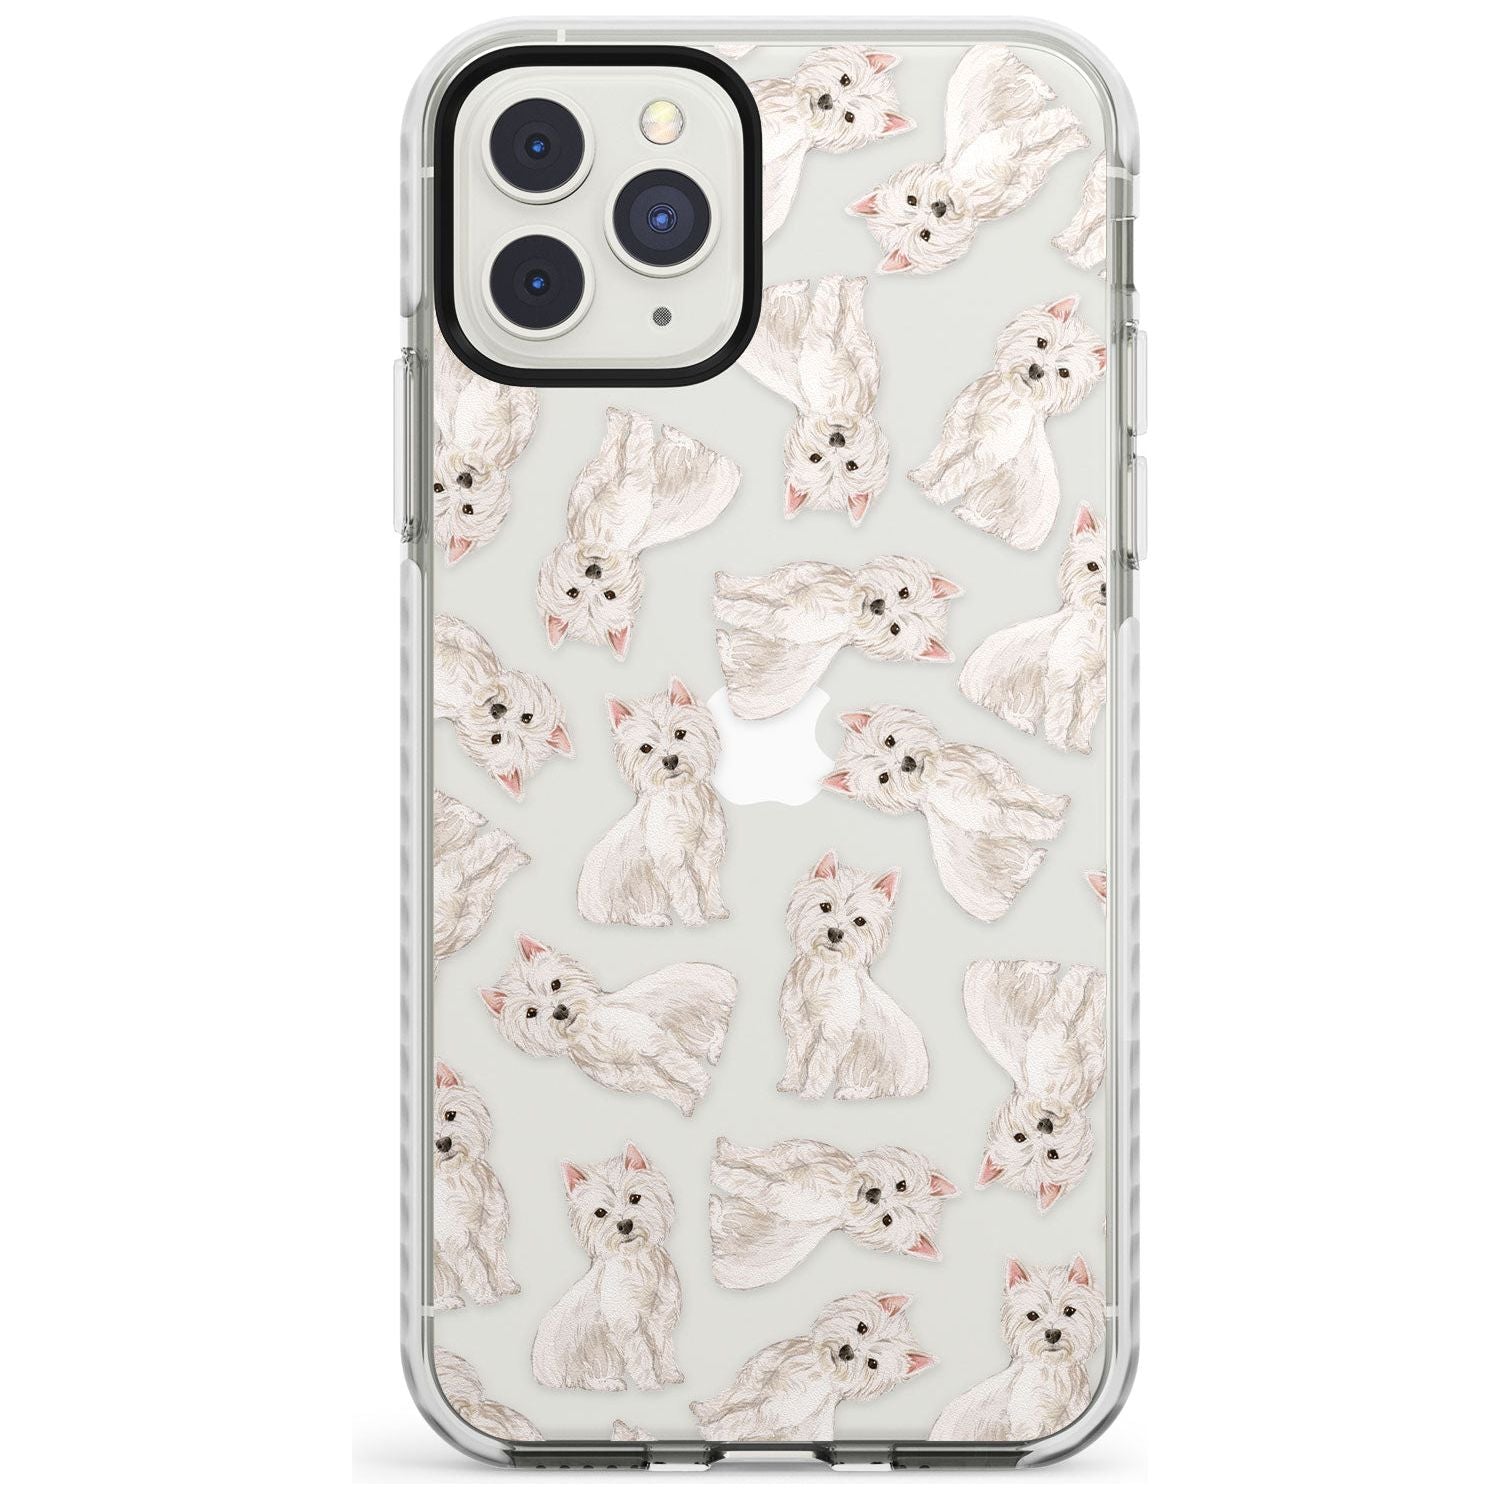 Westie Watercolour Dog Pattern Impact Phone Case for iPhone 11 Pro Max